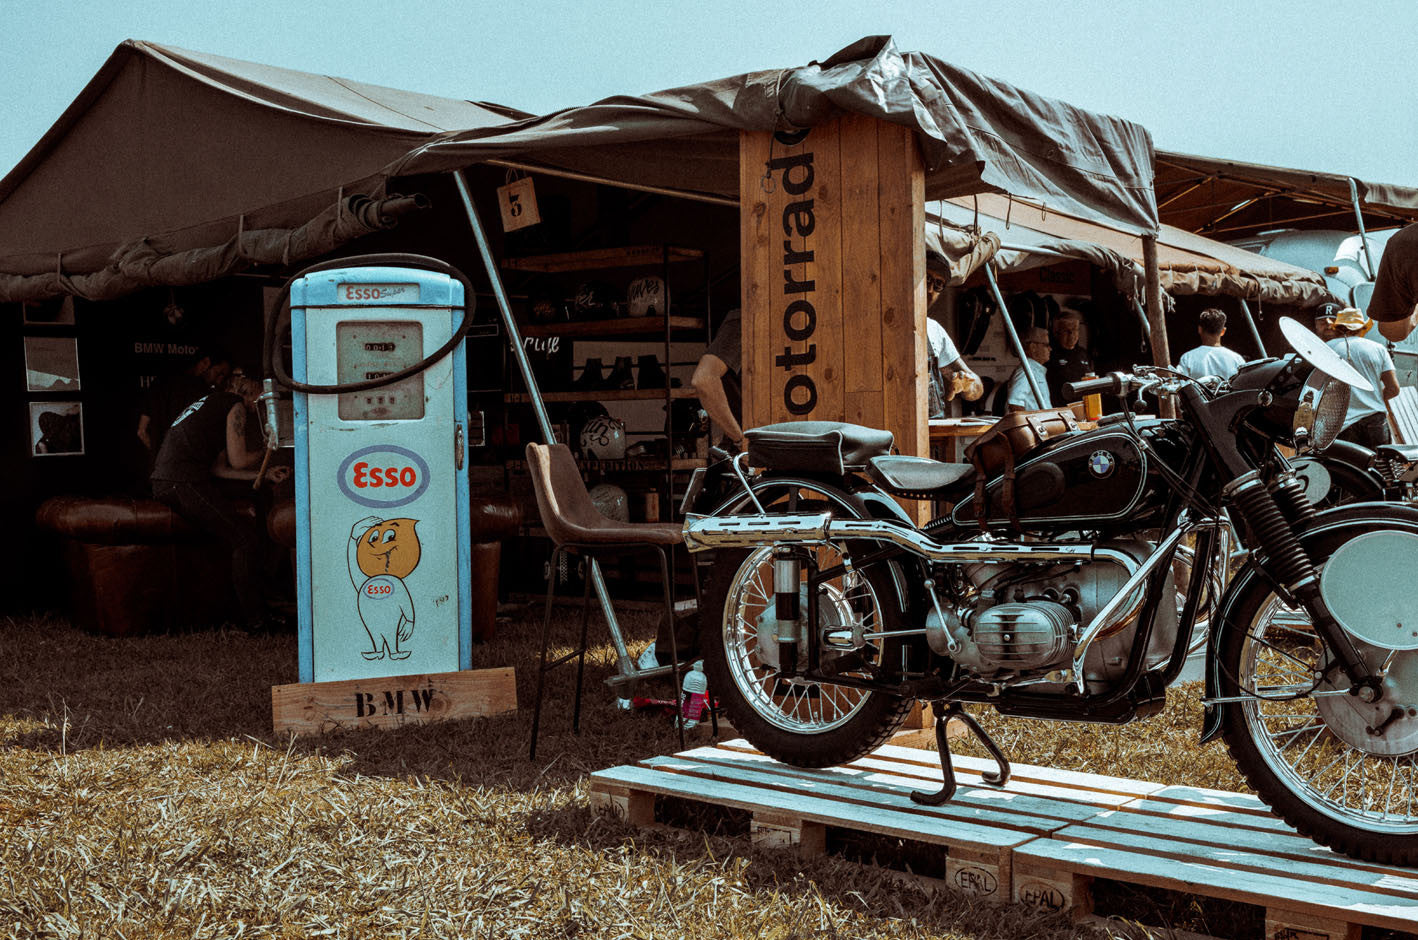 WHEELS & WAVES 2017 WNW 2017 WHEELS AND WAVES PANDCO P&CO BIARRITZ FRANCE MOTORCYCLE CAFE RACERS CUSTOM SURF